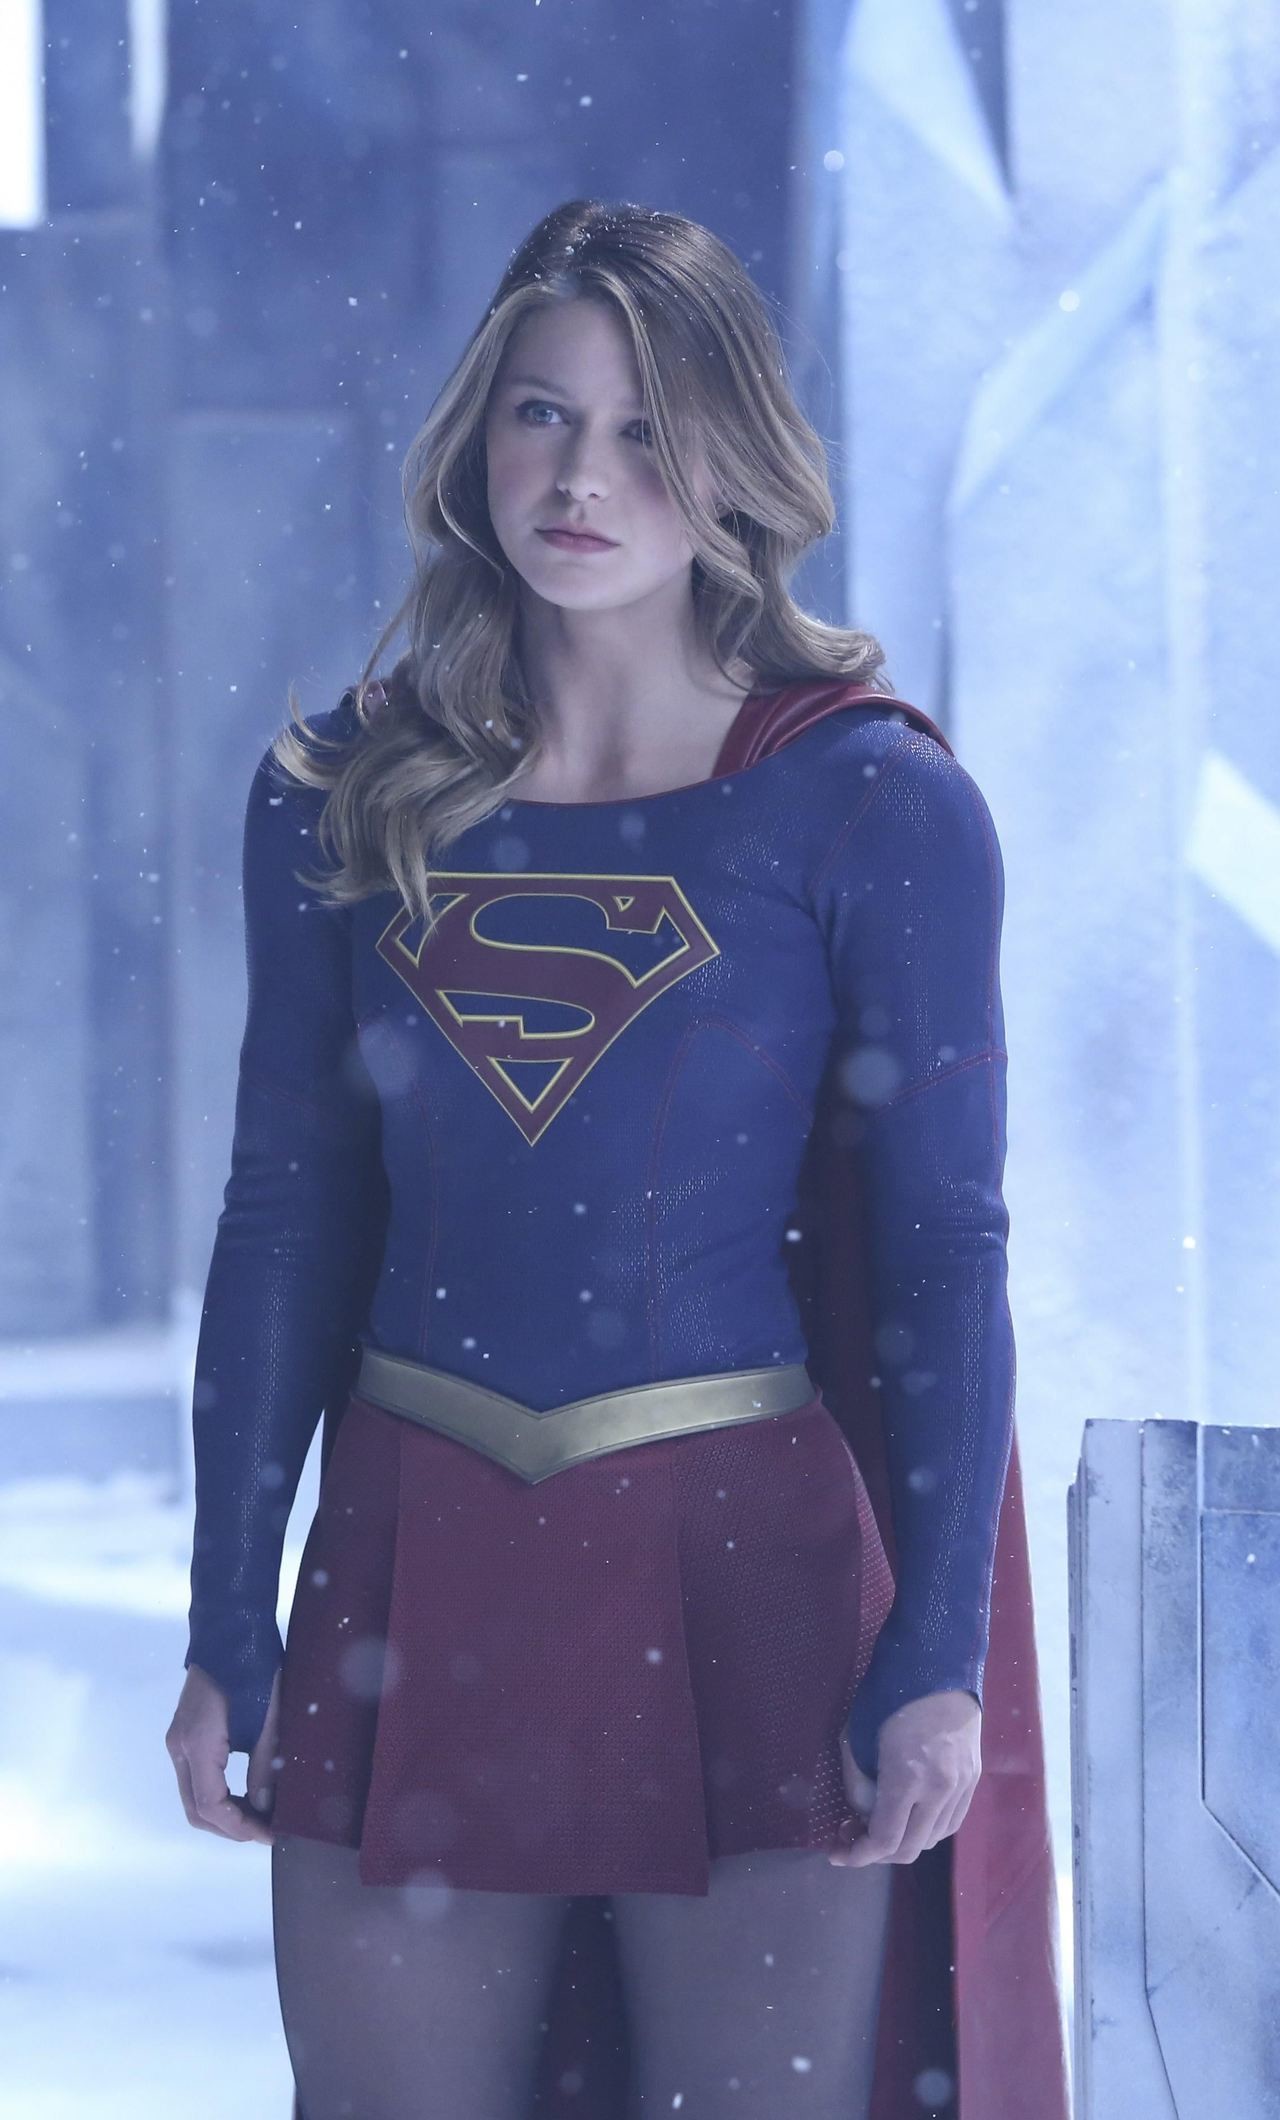 1280x2120 750x1334 Wallpaper Supergirl, back view 1920x1440 HD Picture, Image">